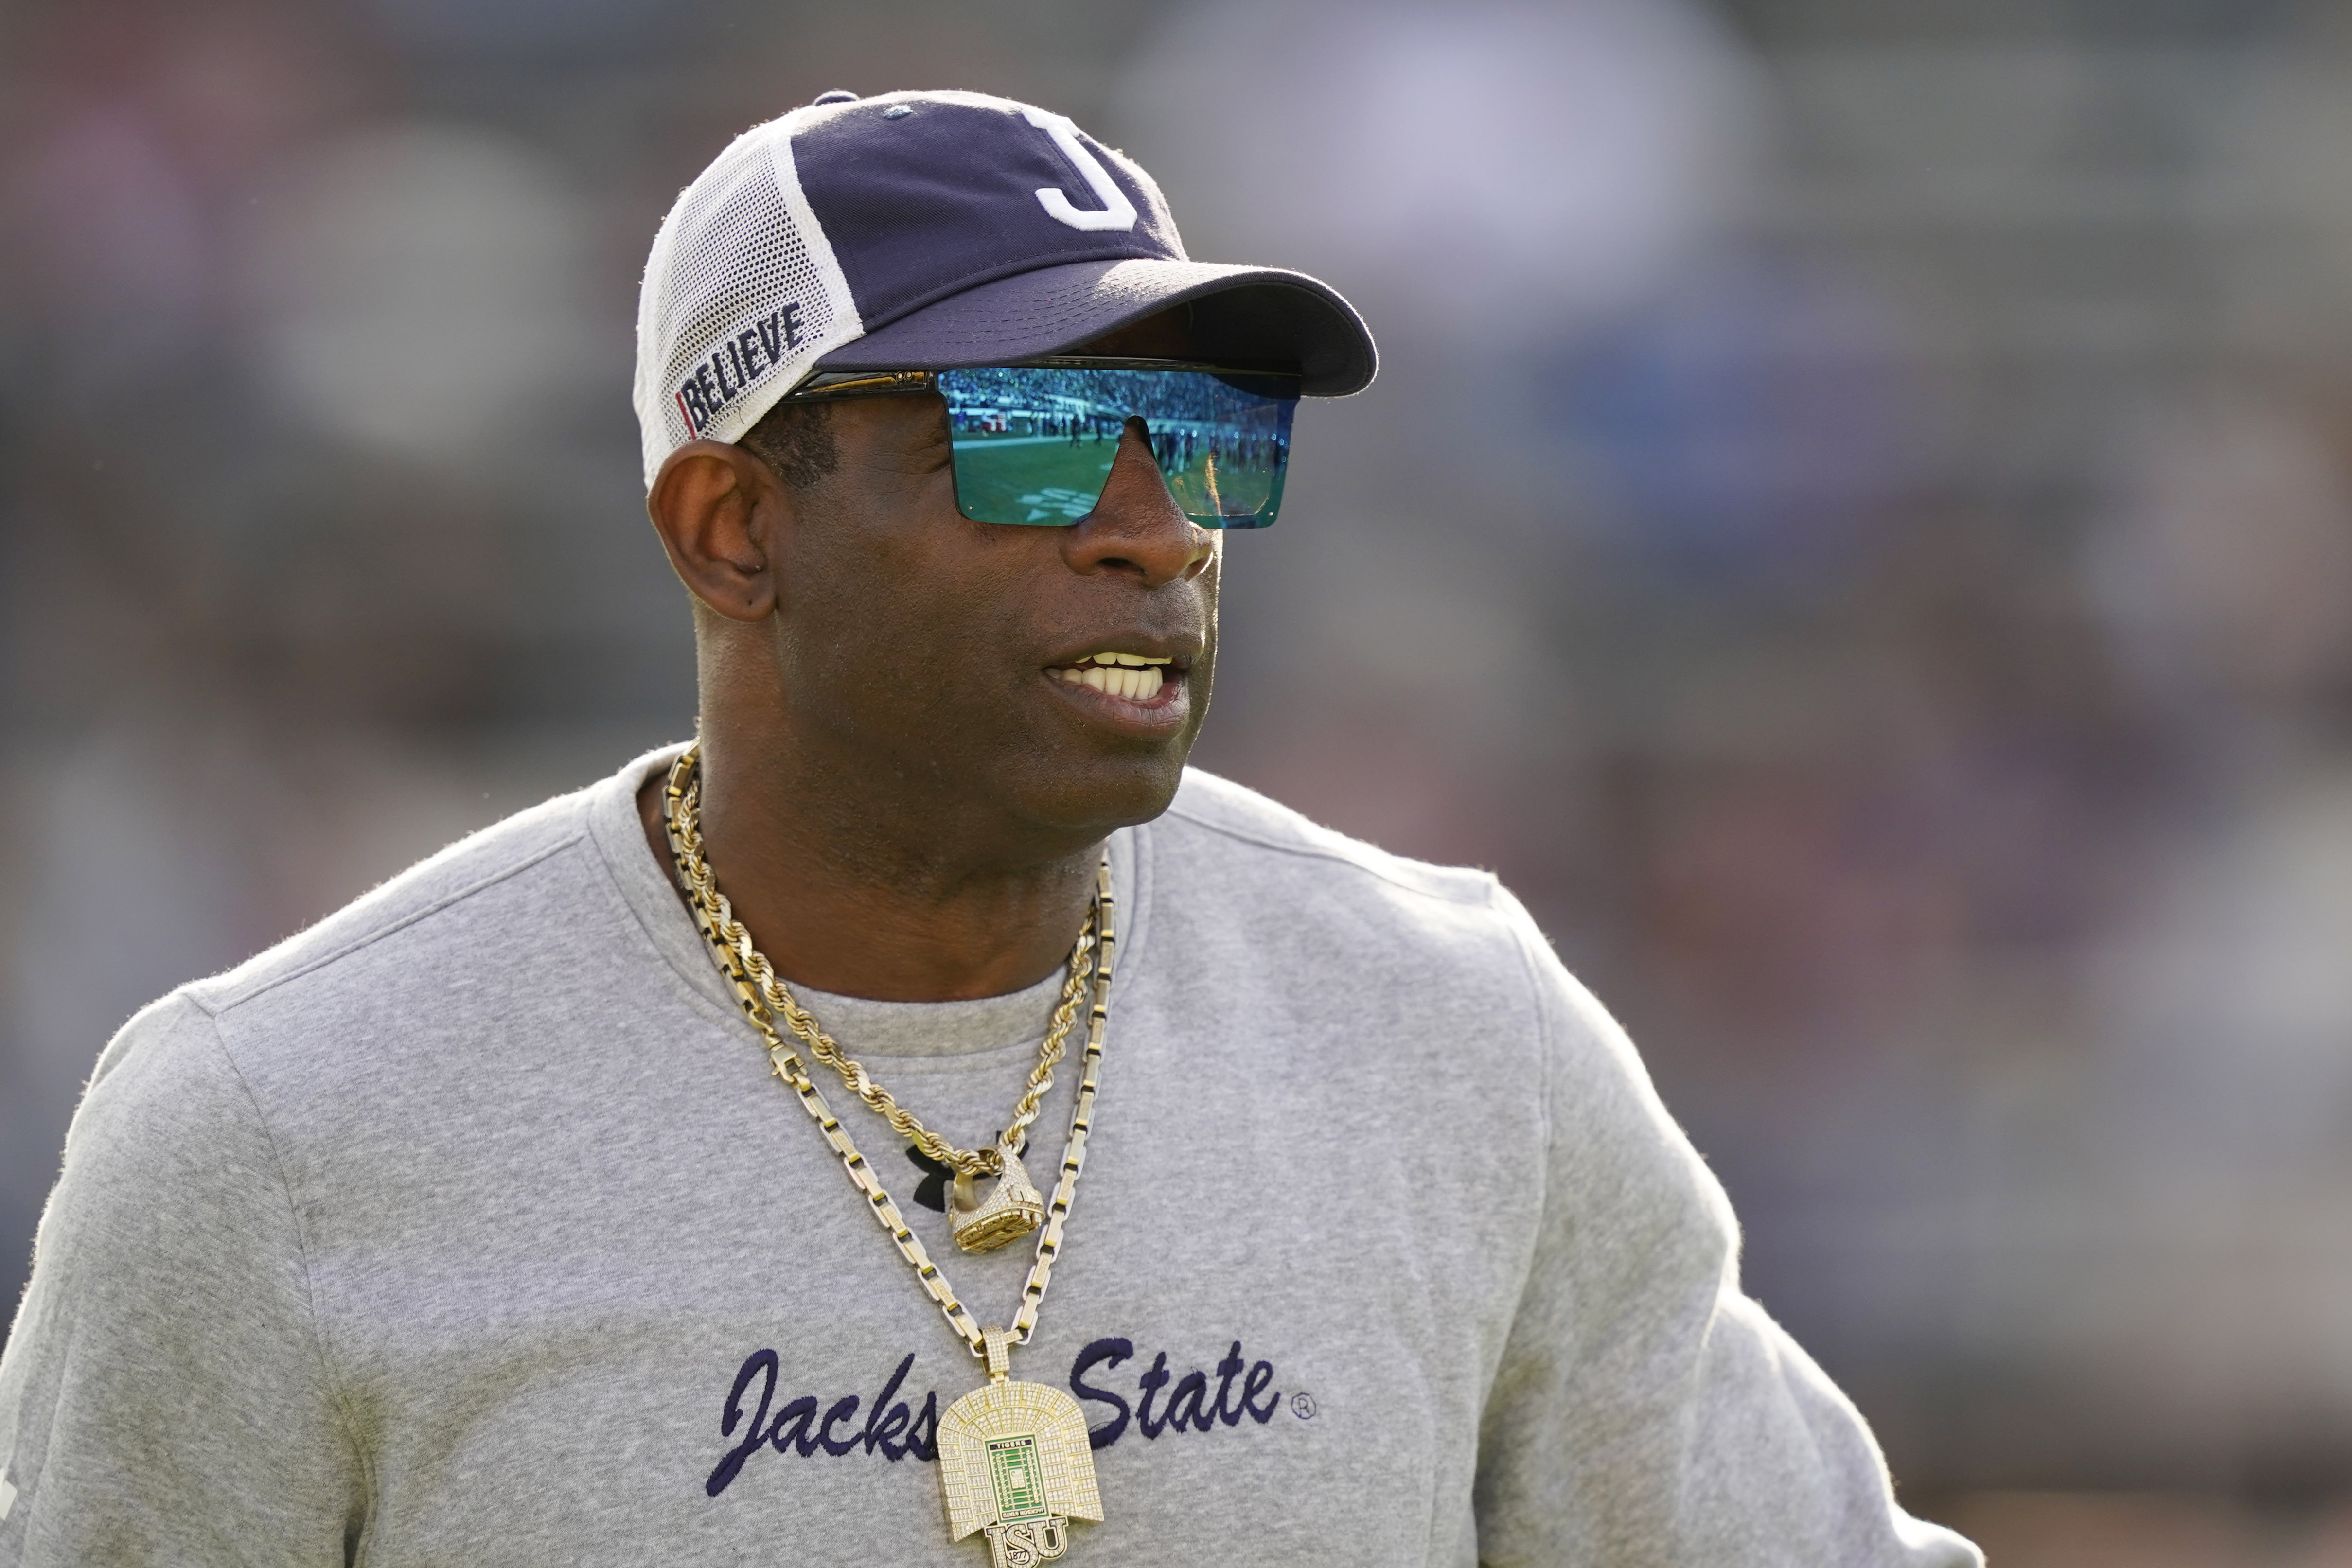 Deion Sanders responds to Nick Saban's comments about Jackson State